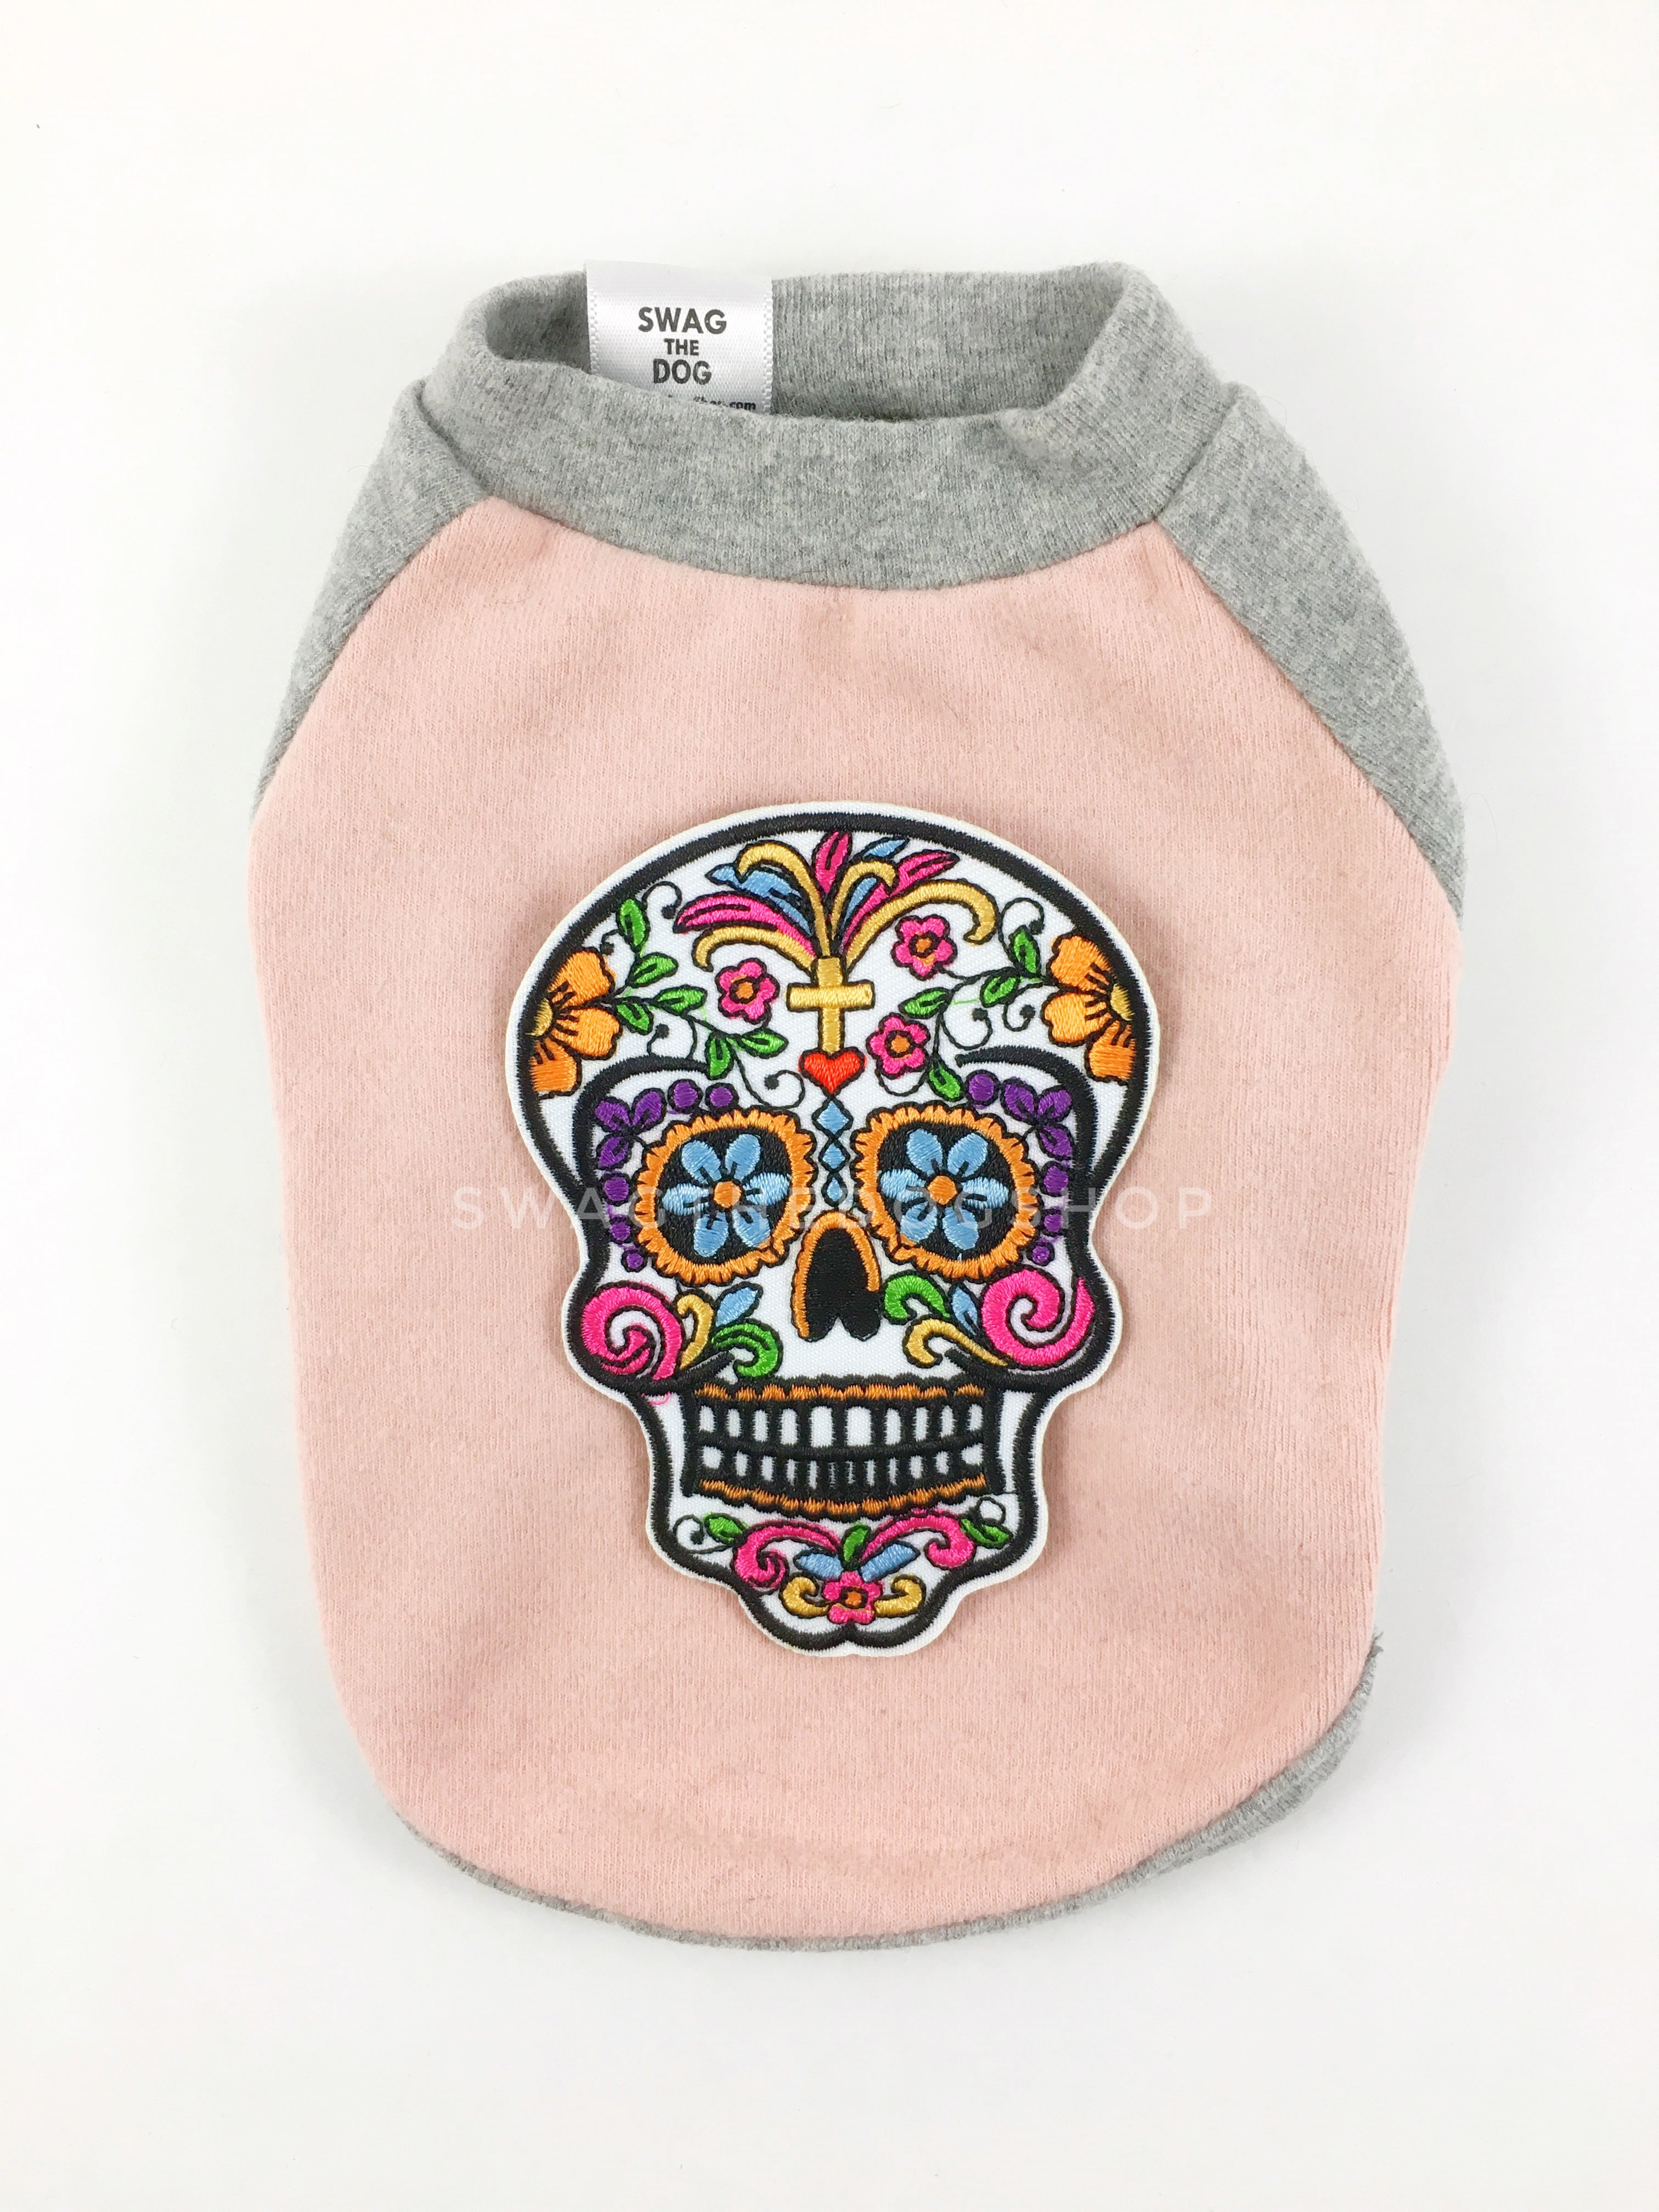 Pink and Gray Centerfield Tees T-Shirt - Patch Option of Day of Dead Skull. Pink and Gray T-Shirt